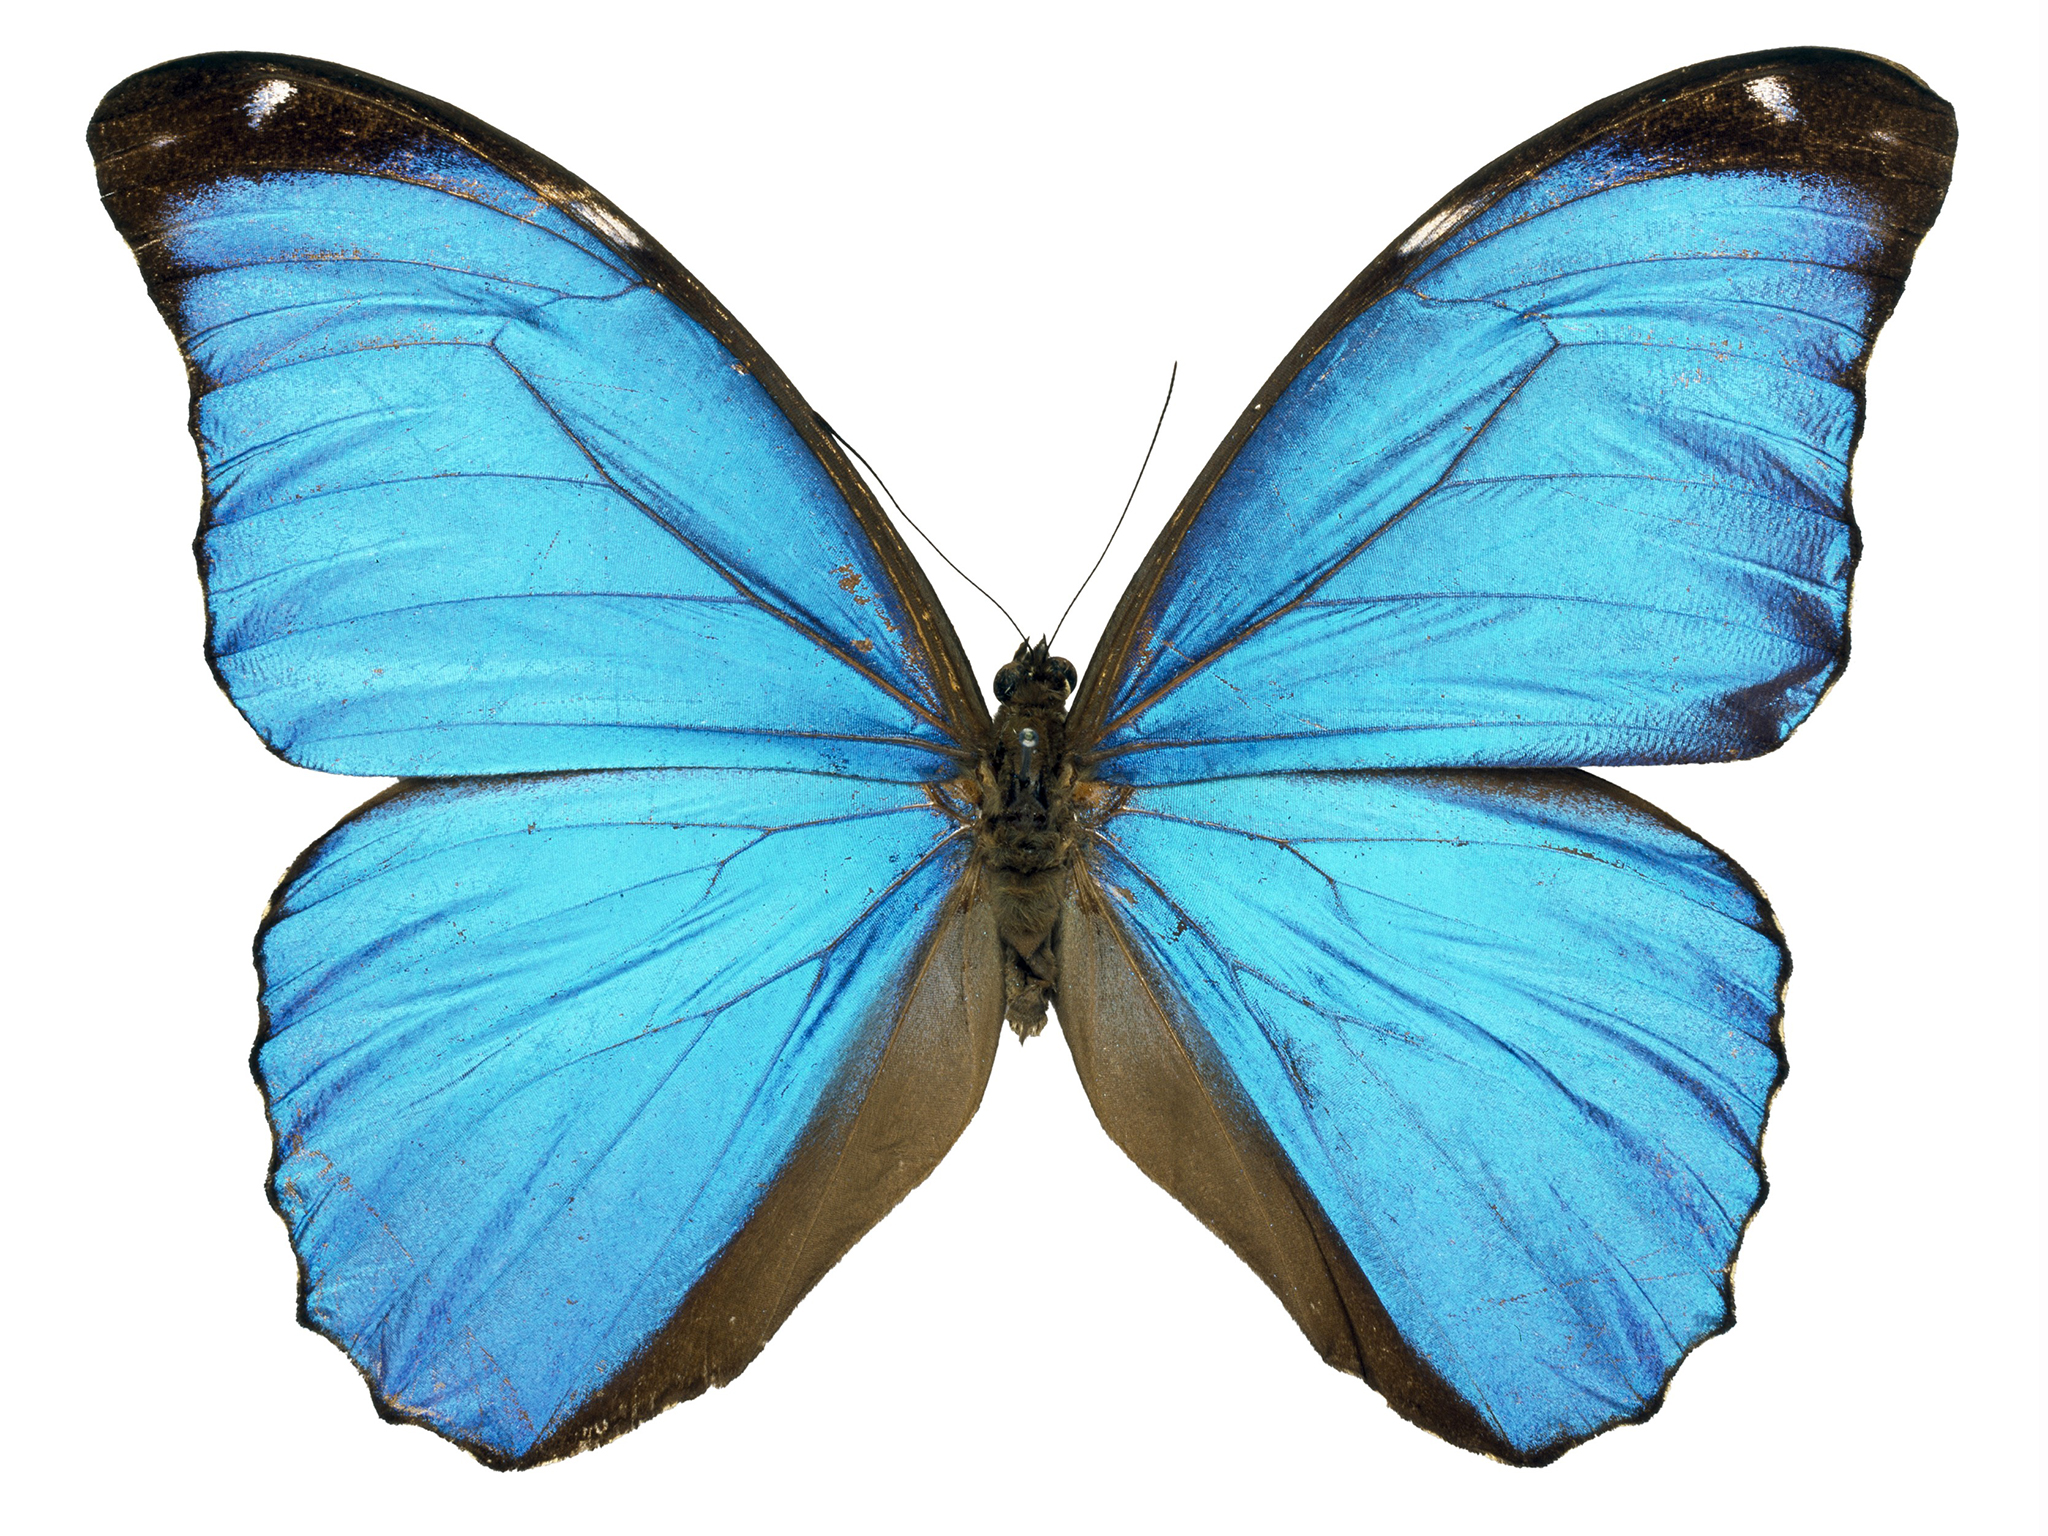 Butterfly High Quality Background on Wallpapers Vista